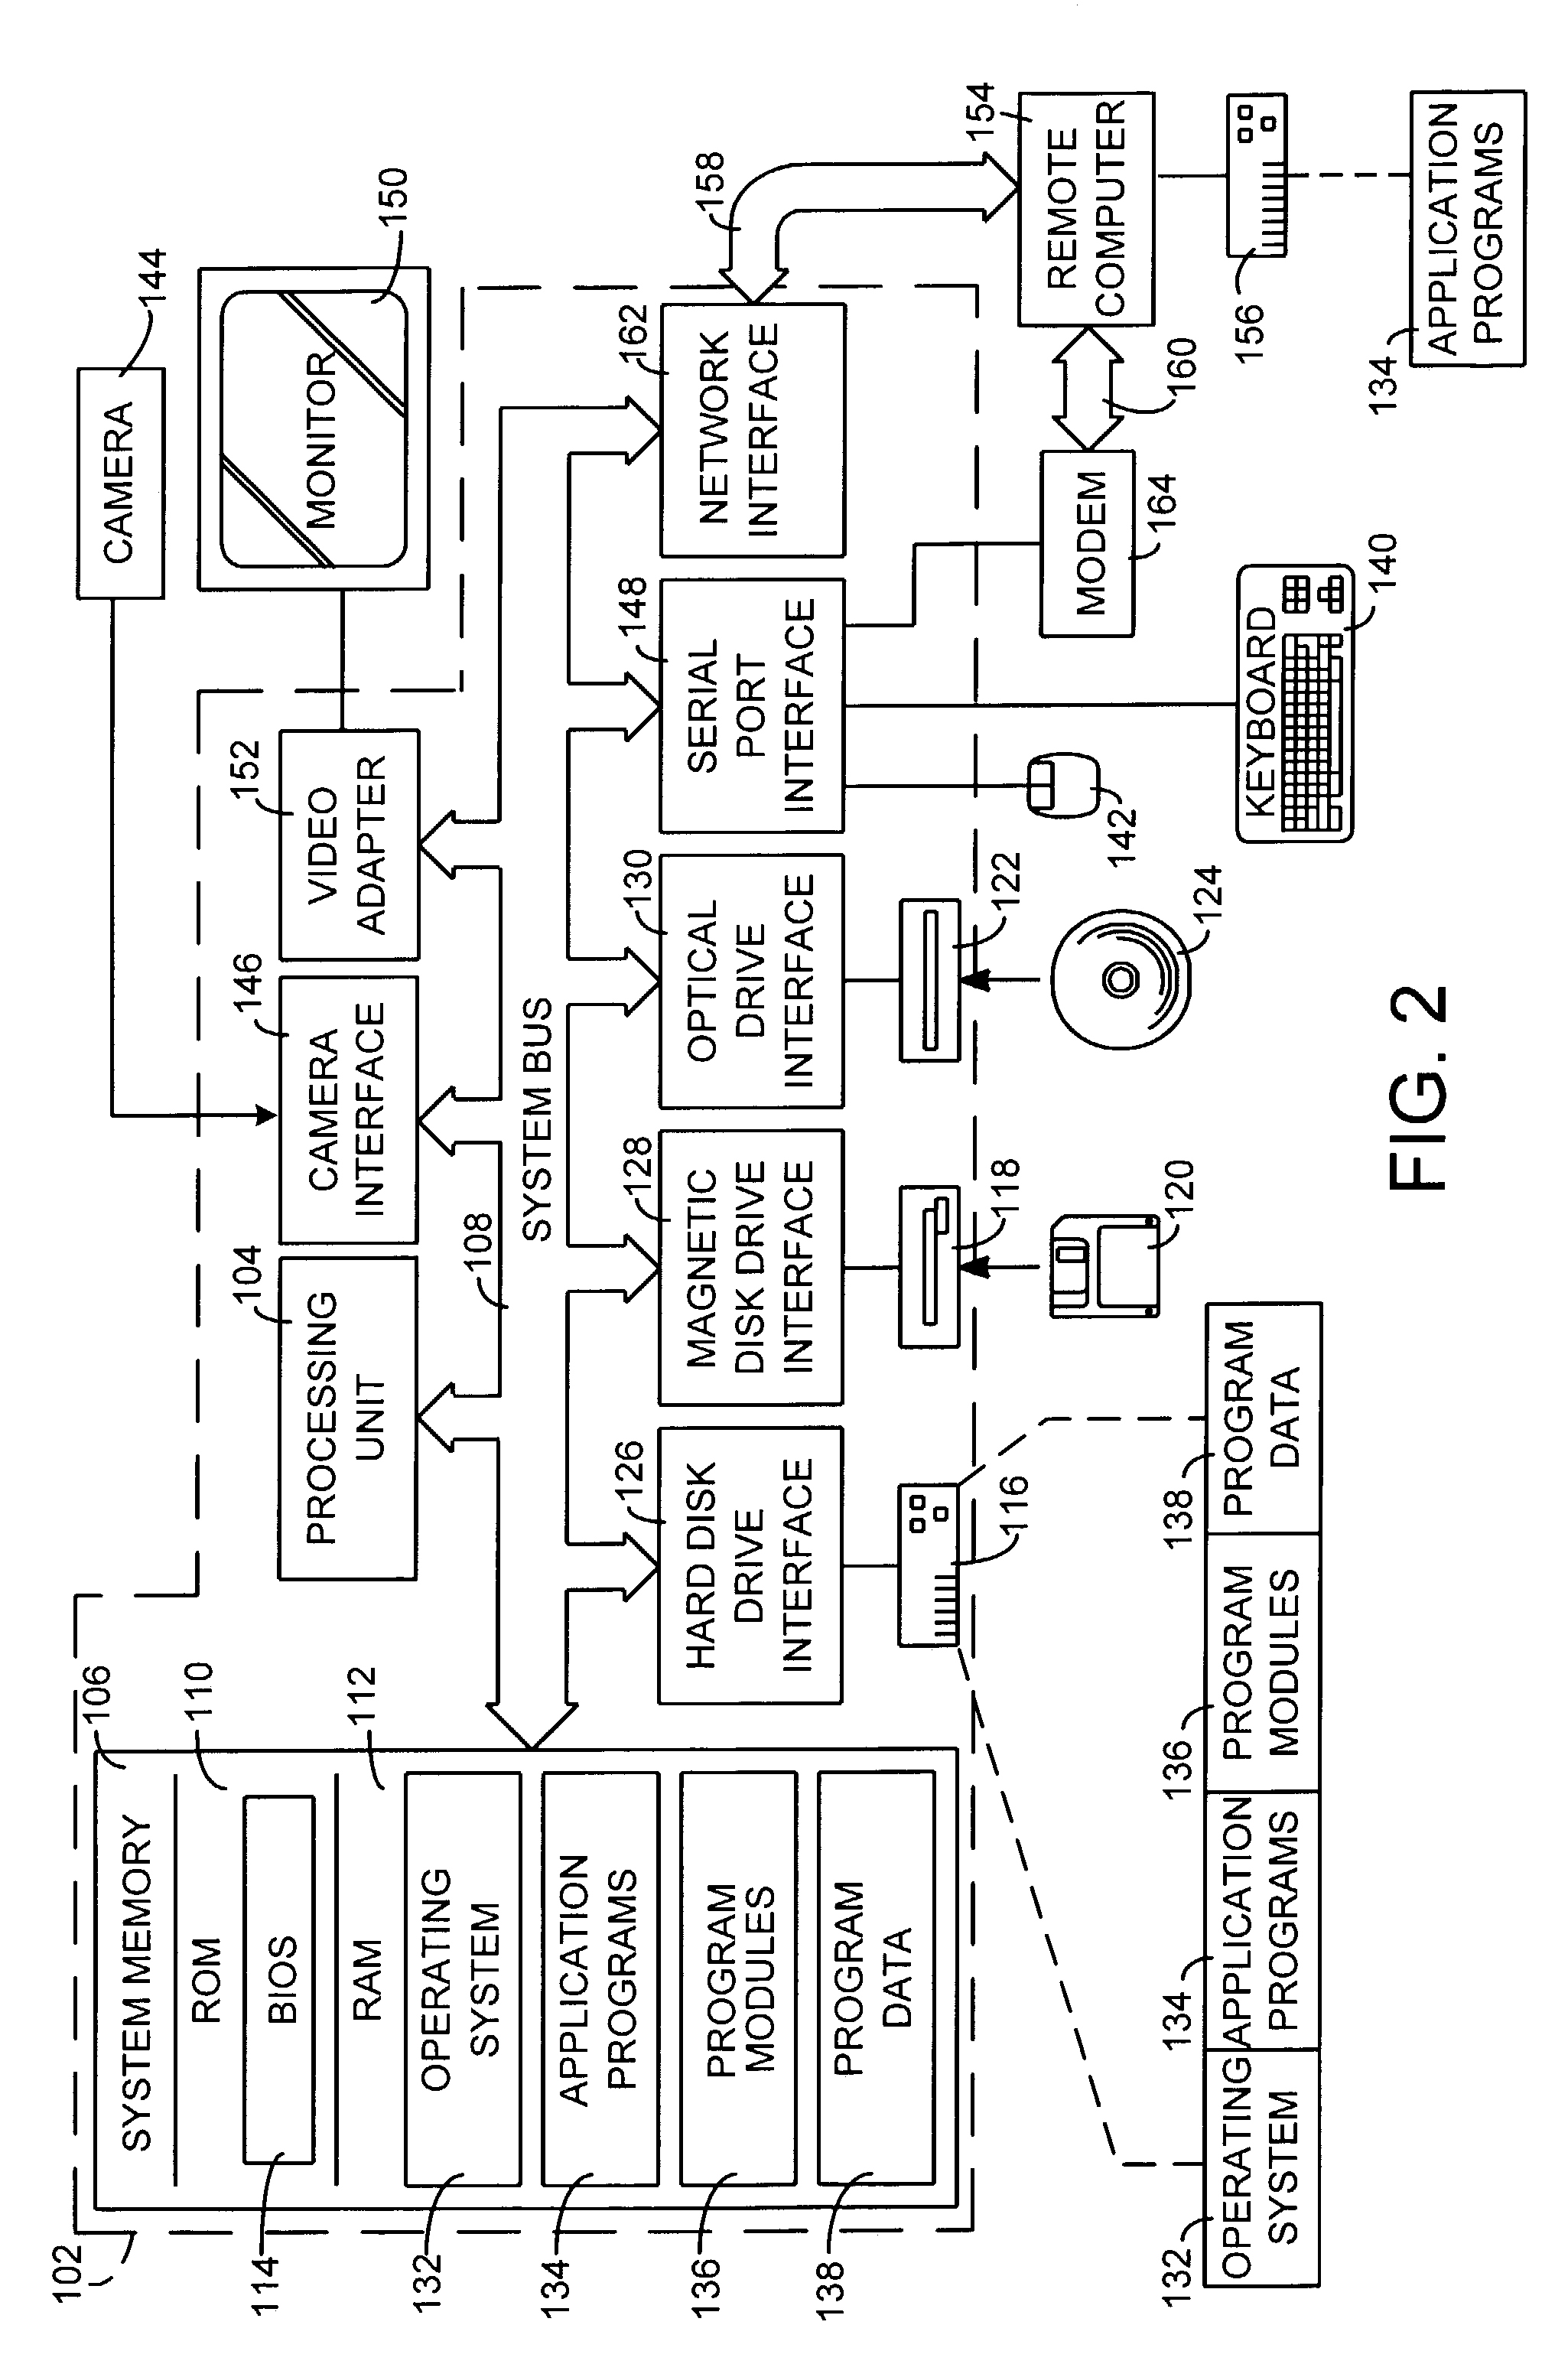 Method and system for concurrent garbage collection